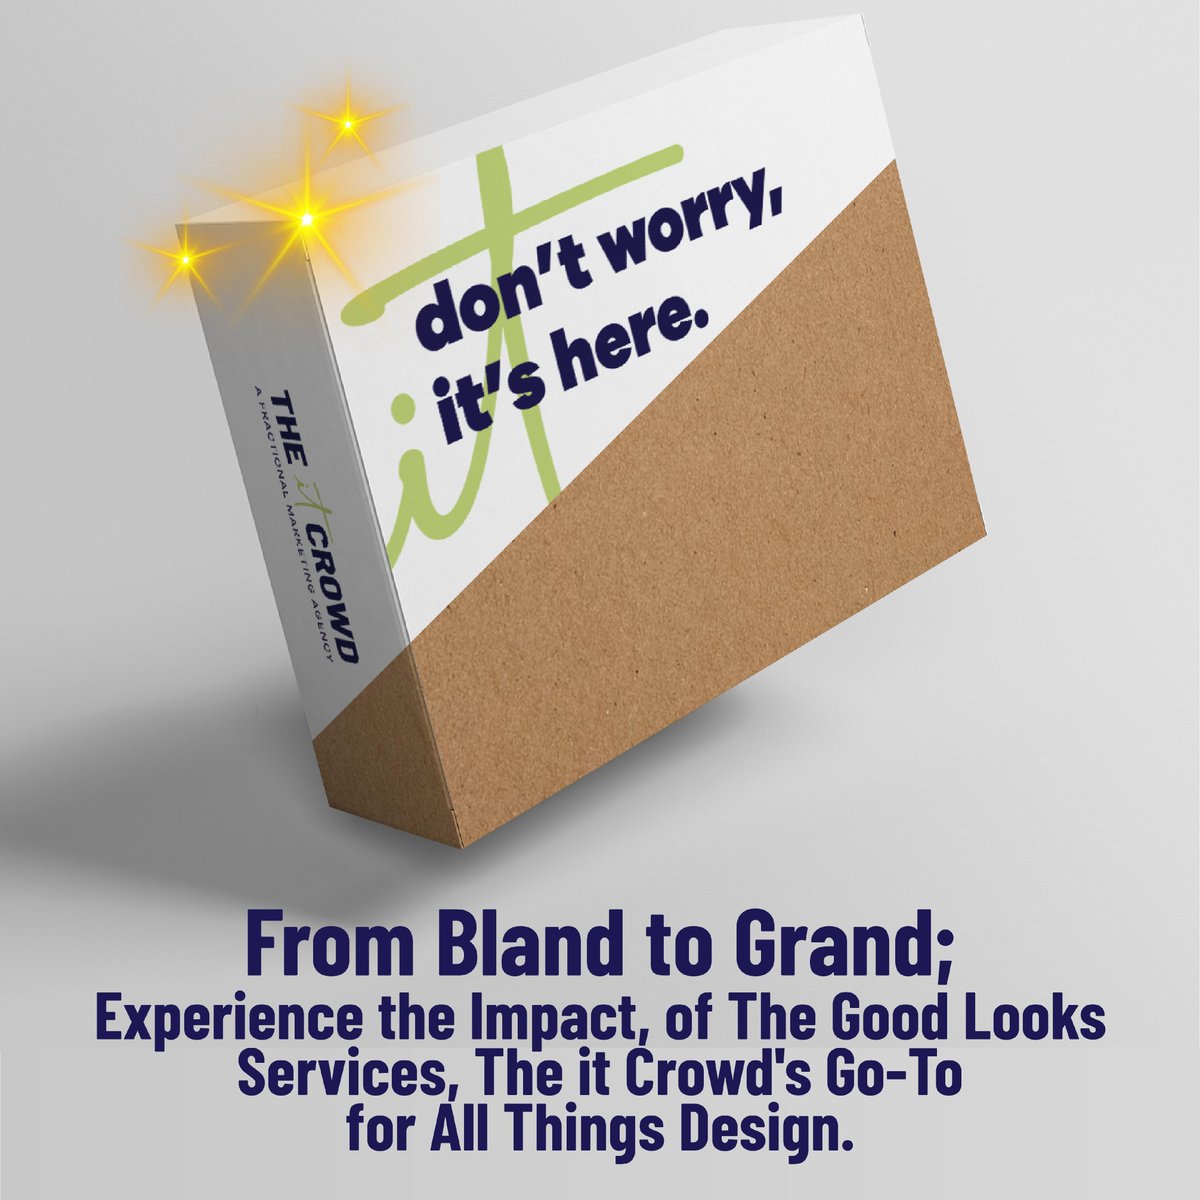 Transform your vision into reality with our design services. #GoodLooks, a service of The it Crowd, focuses on stepping up your brand through innovation, customization, and refinement. Stand out in a crowded marketplace. Discover how: theitcrowd.com #BrandingExcellence